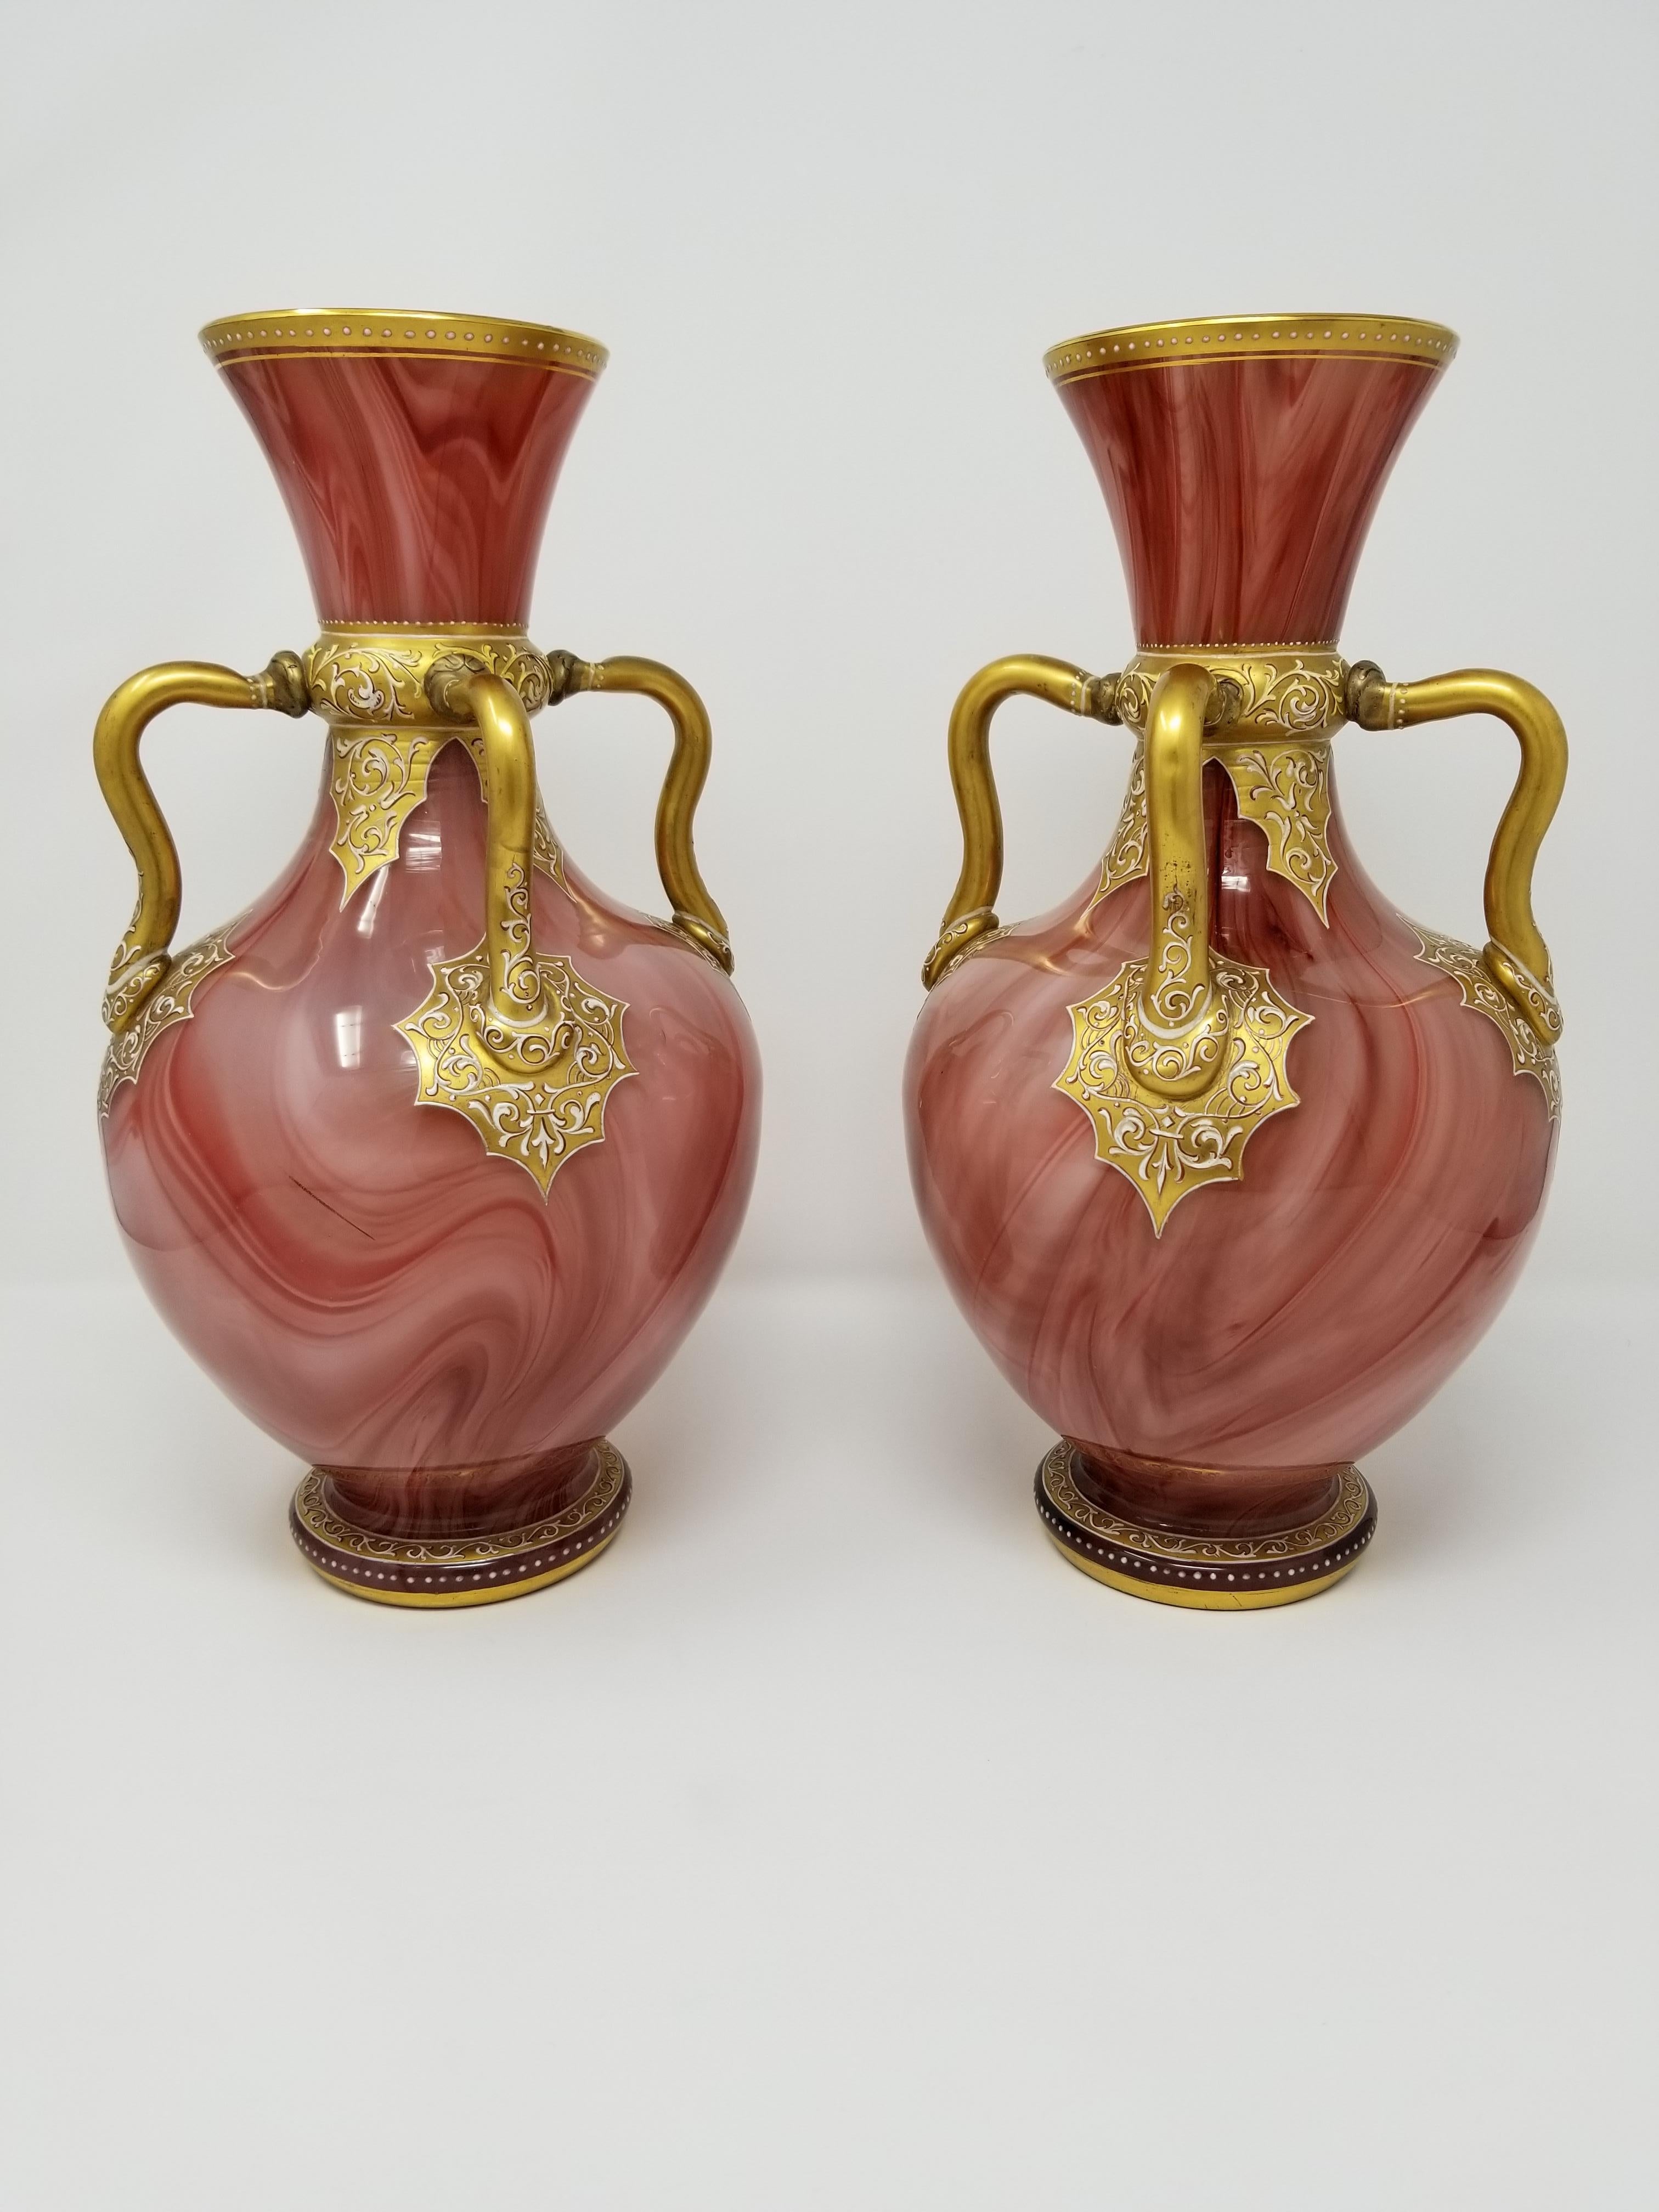 A fine pair of antique Orientalist Moser enameled marbleized glass vases in the Orientalist style. With an unusual pink/brick color with four hand-applied glass handles. Each decorated in the orientalist design with beautiful marbleized strokes of